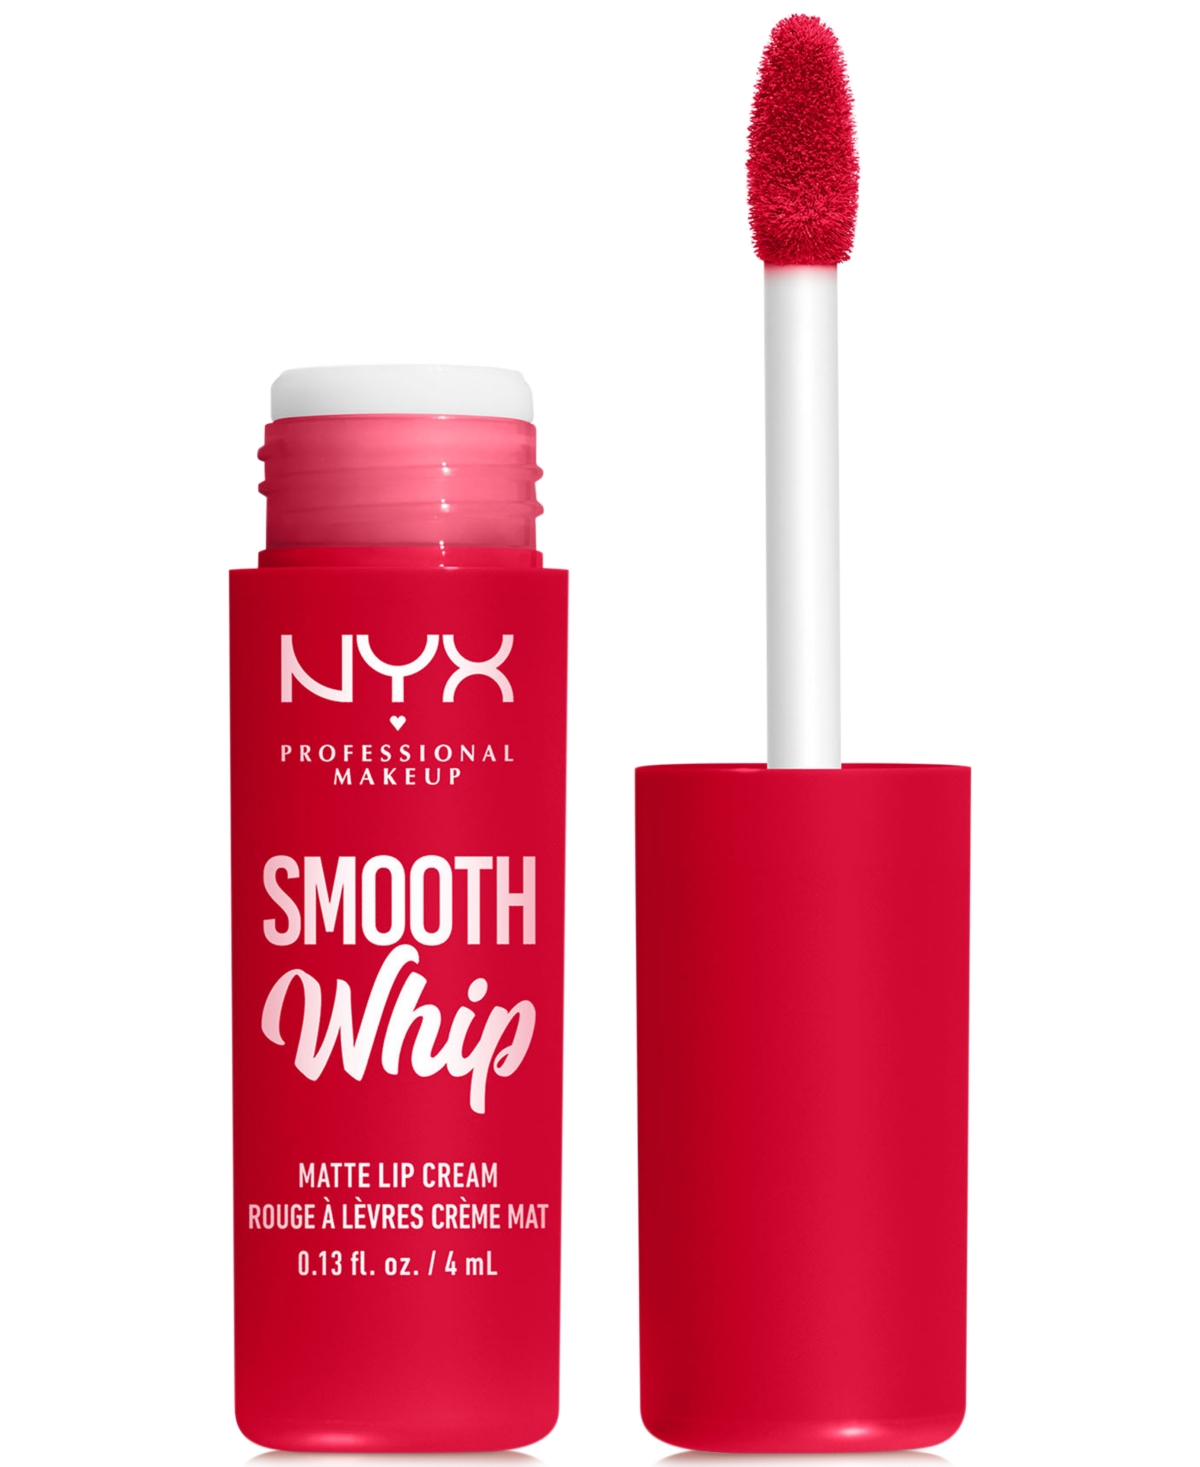 Nyx Professional Makeup Smooth Whip Matte Lip Cream In Cherry Creme